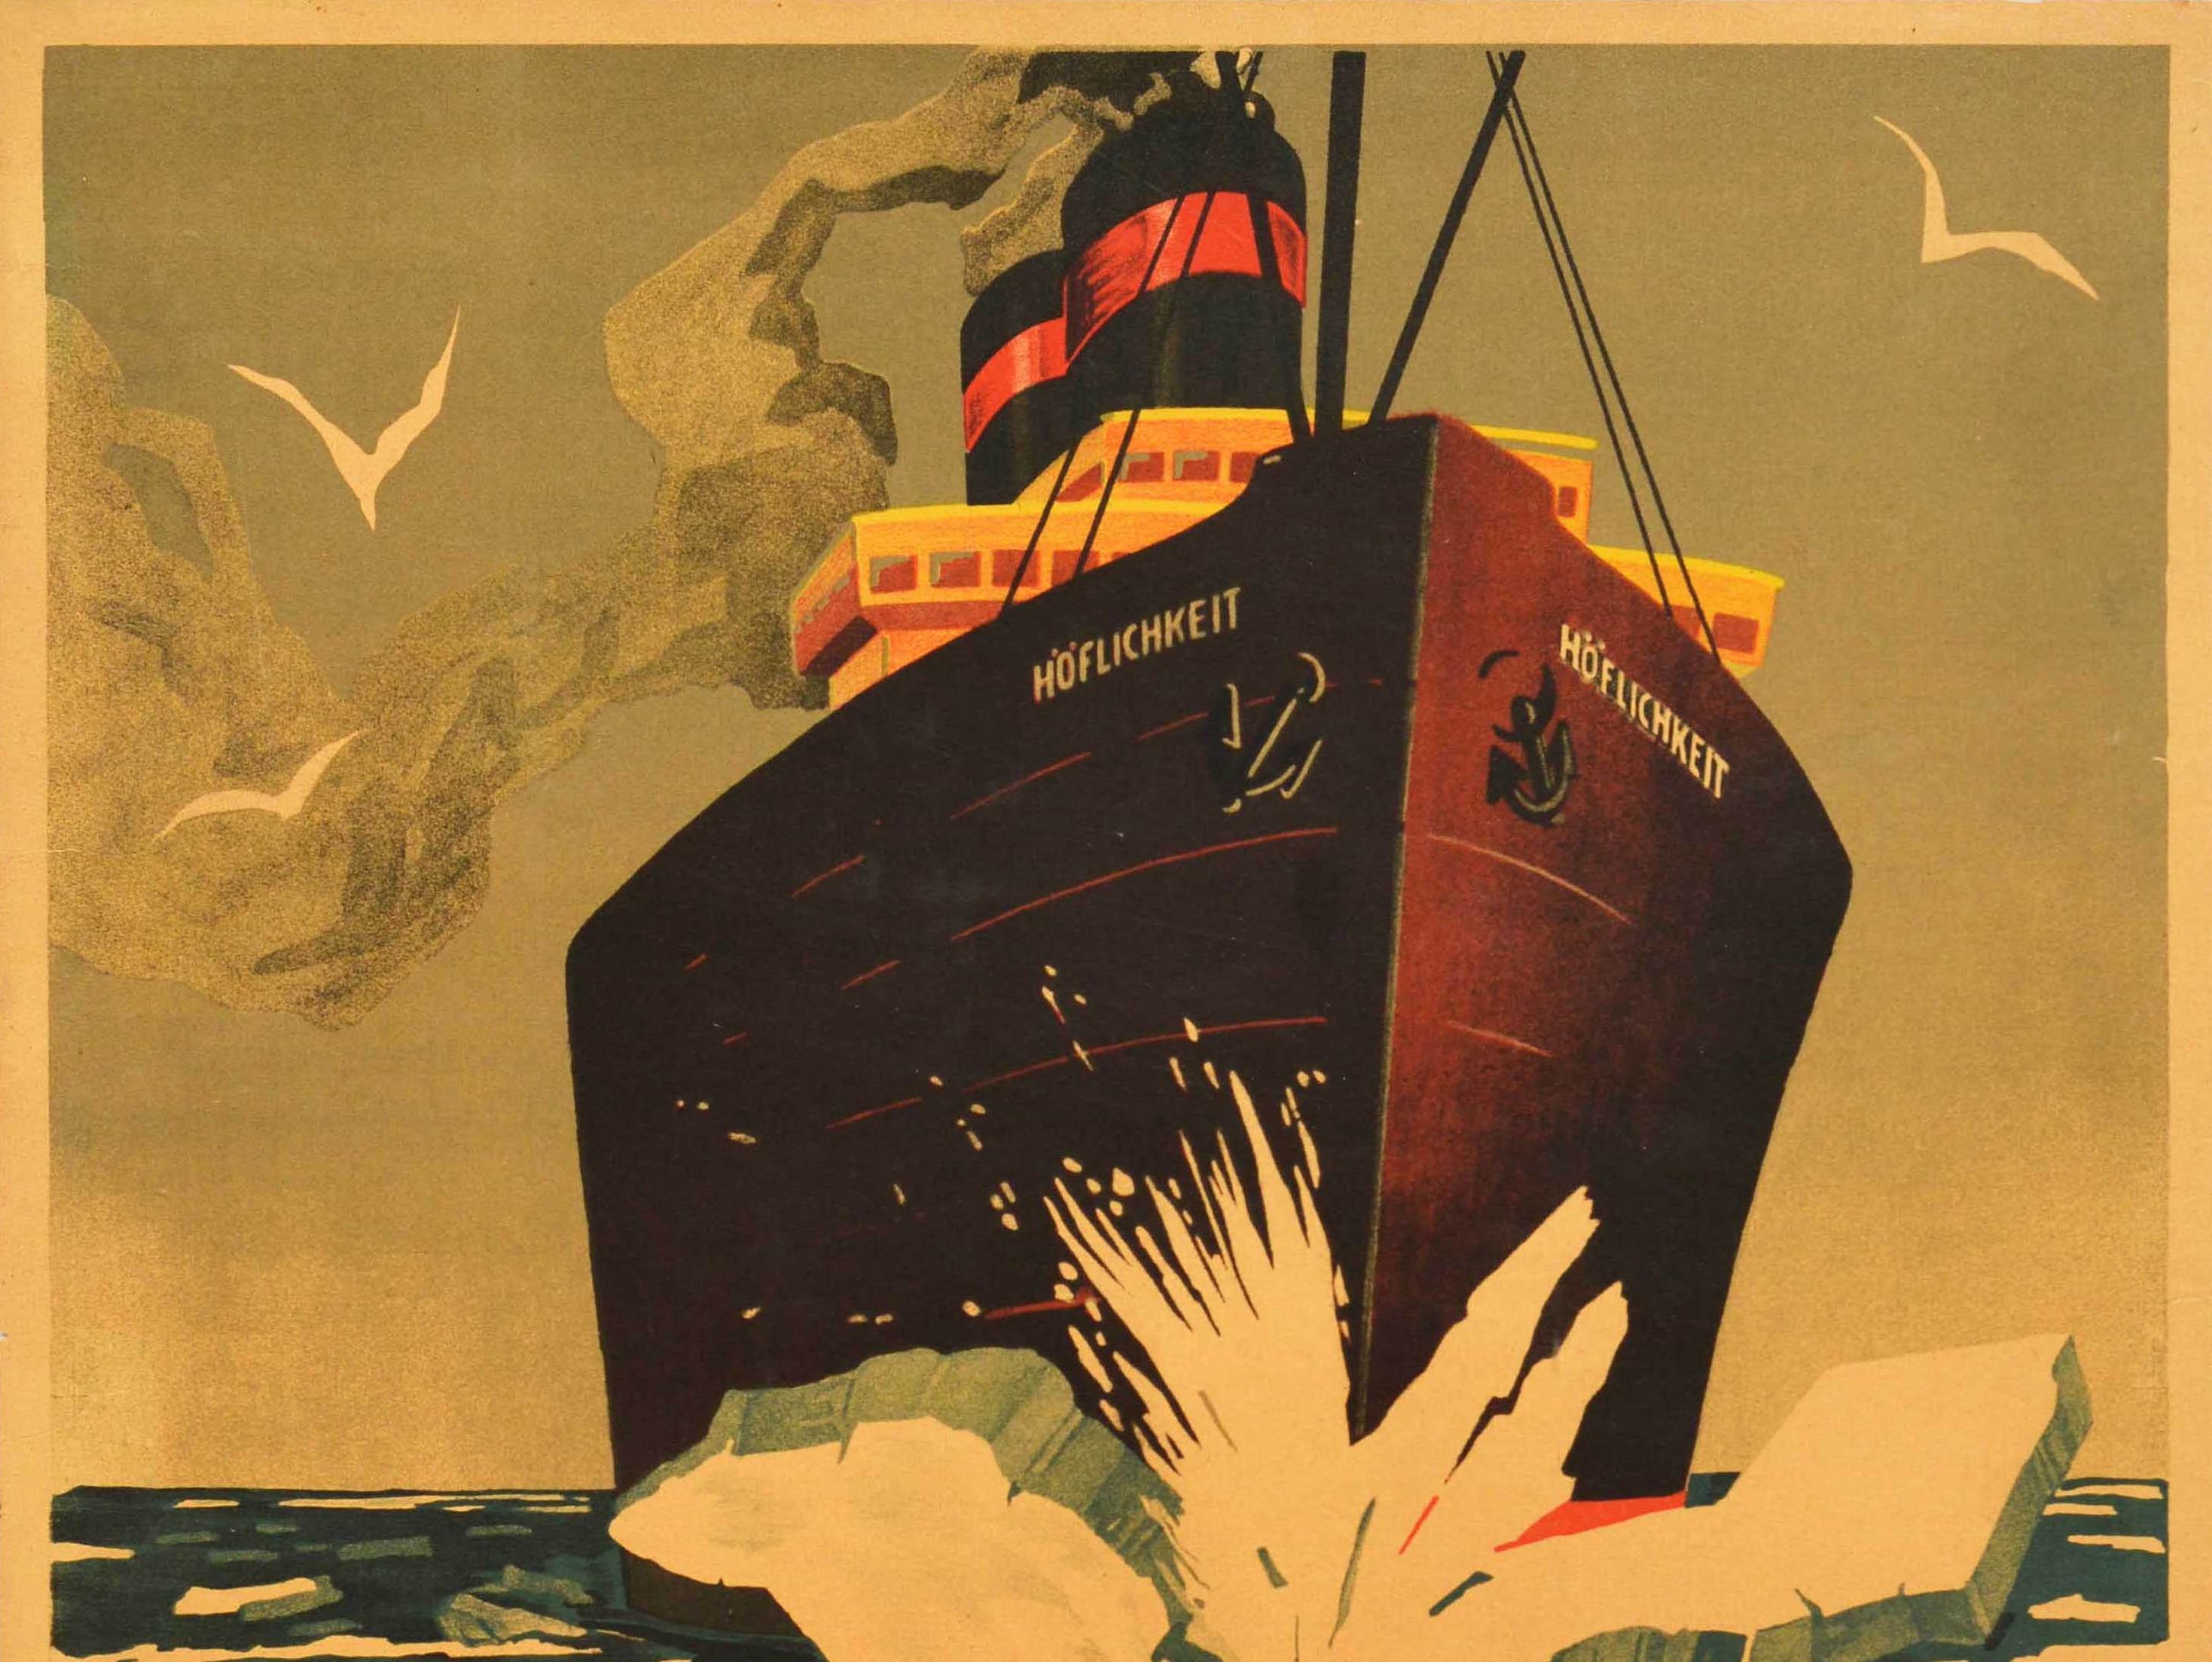 Original vintage German motivational workplace poster issued by the Parker-Holladay company in Berlin featuring an illustration of a an icebreaker ship named the Hoflichkeit sailing through the icy sea with birds flying overhead and the quote below